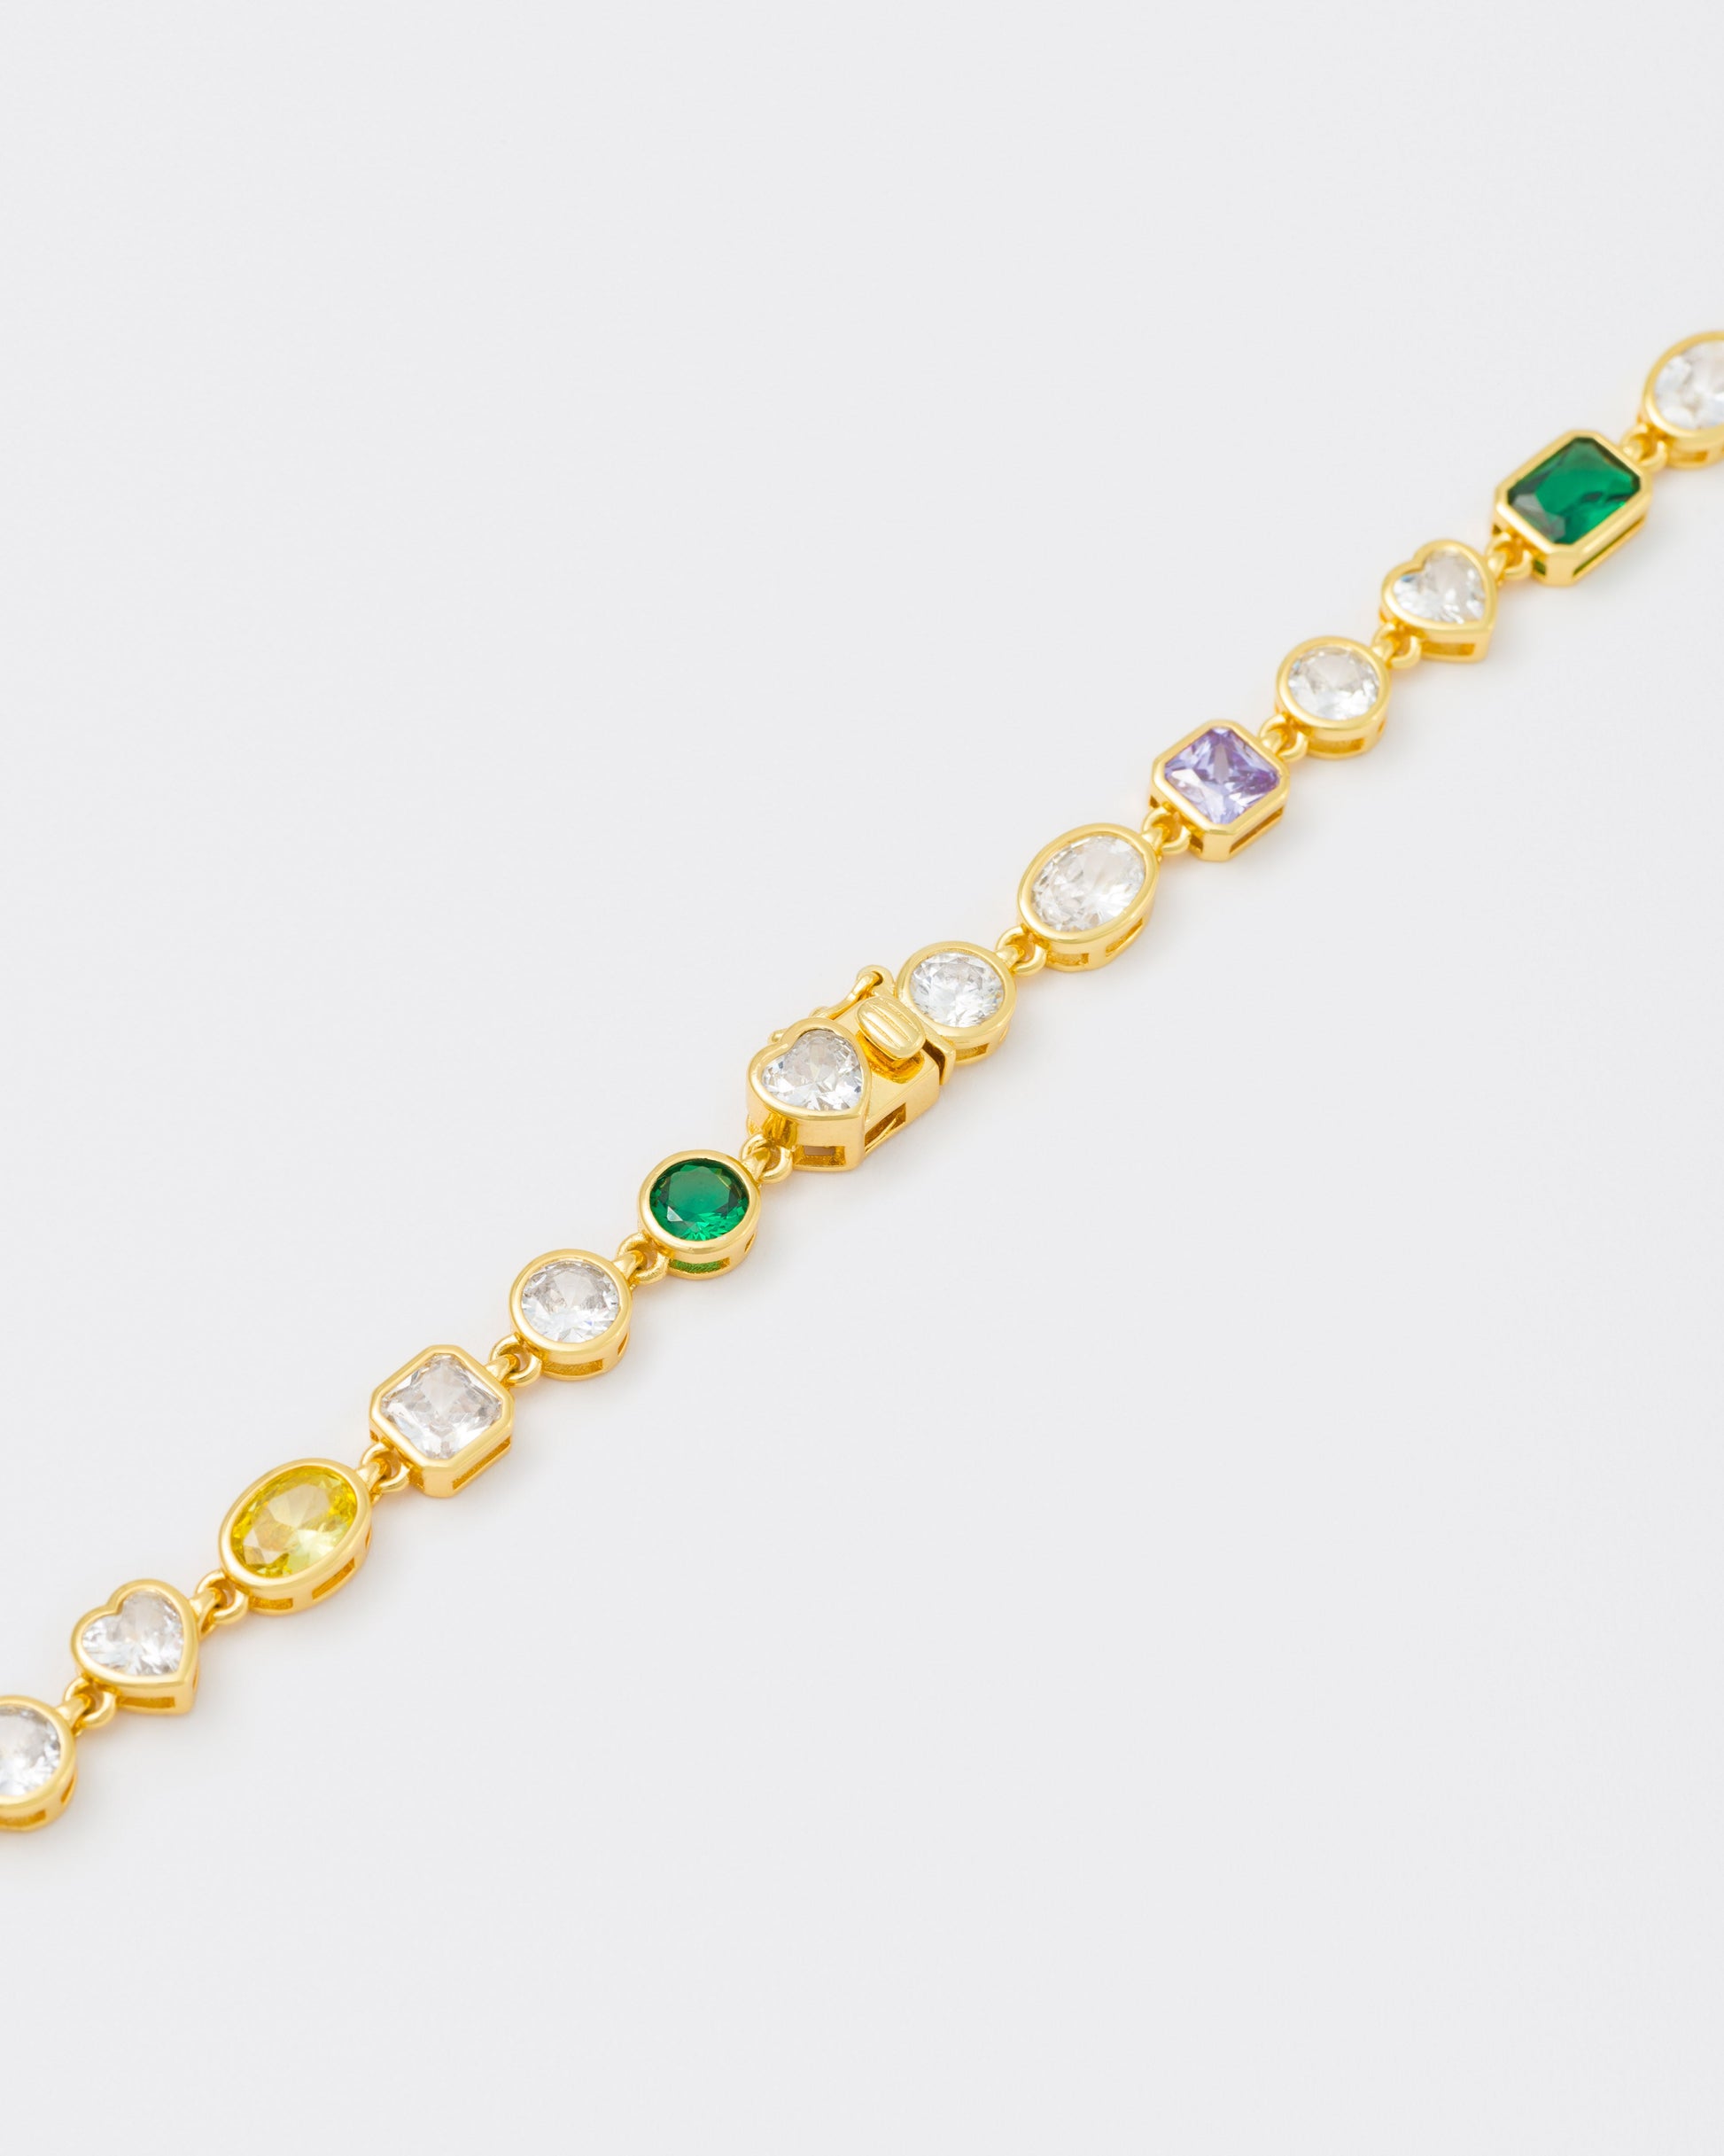 detail of clasps of 18k yellow gold coated mixed bezels chain necklace with hand-set stones in different shapes and colors. Mix of rectangular, square, round and heart-shaped stones in white, amethyst, emerald green and gold yellow